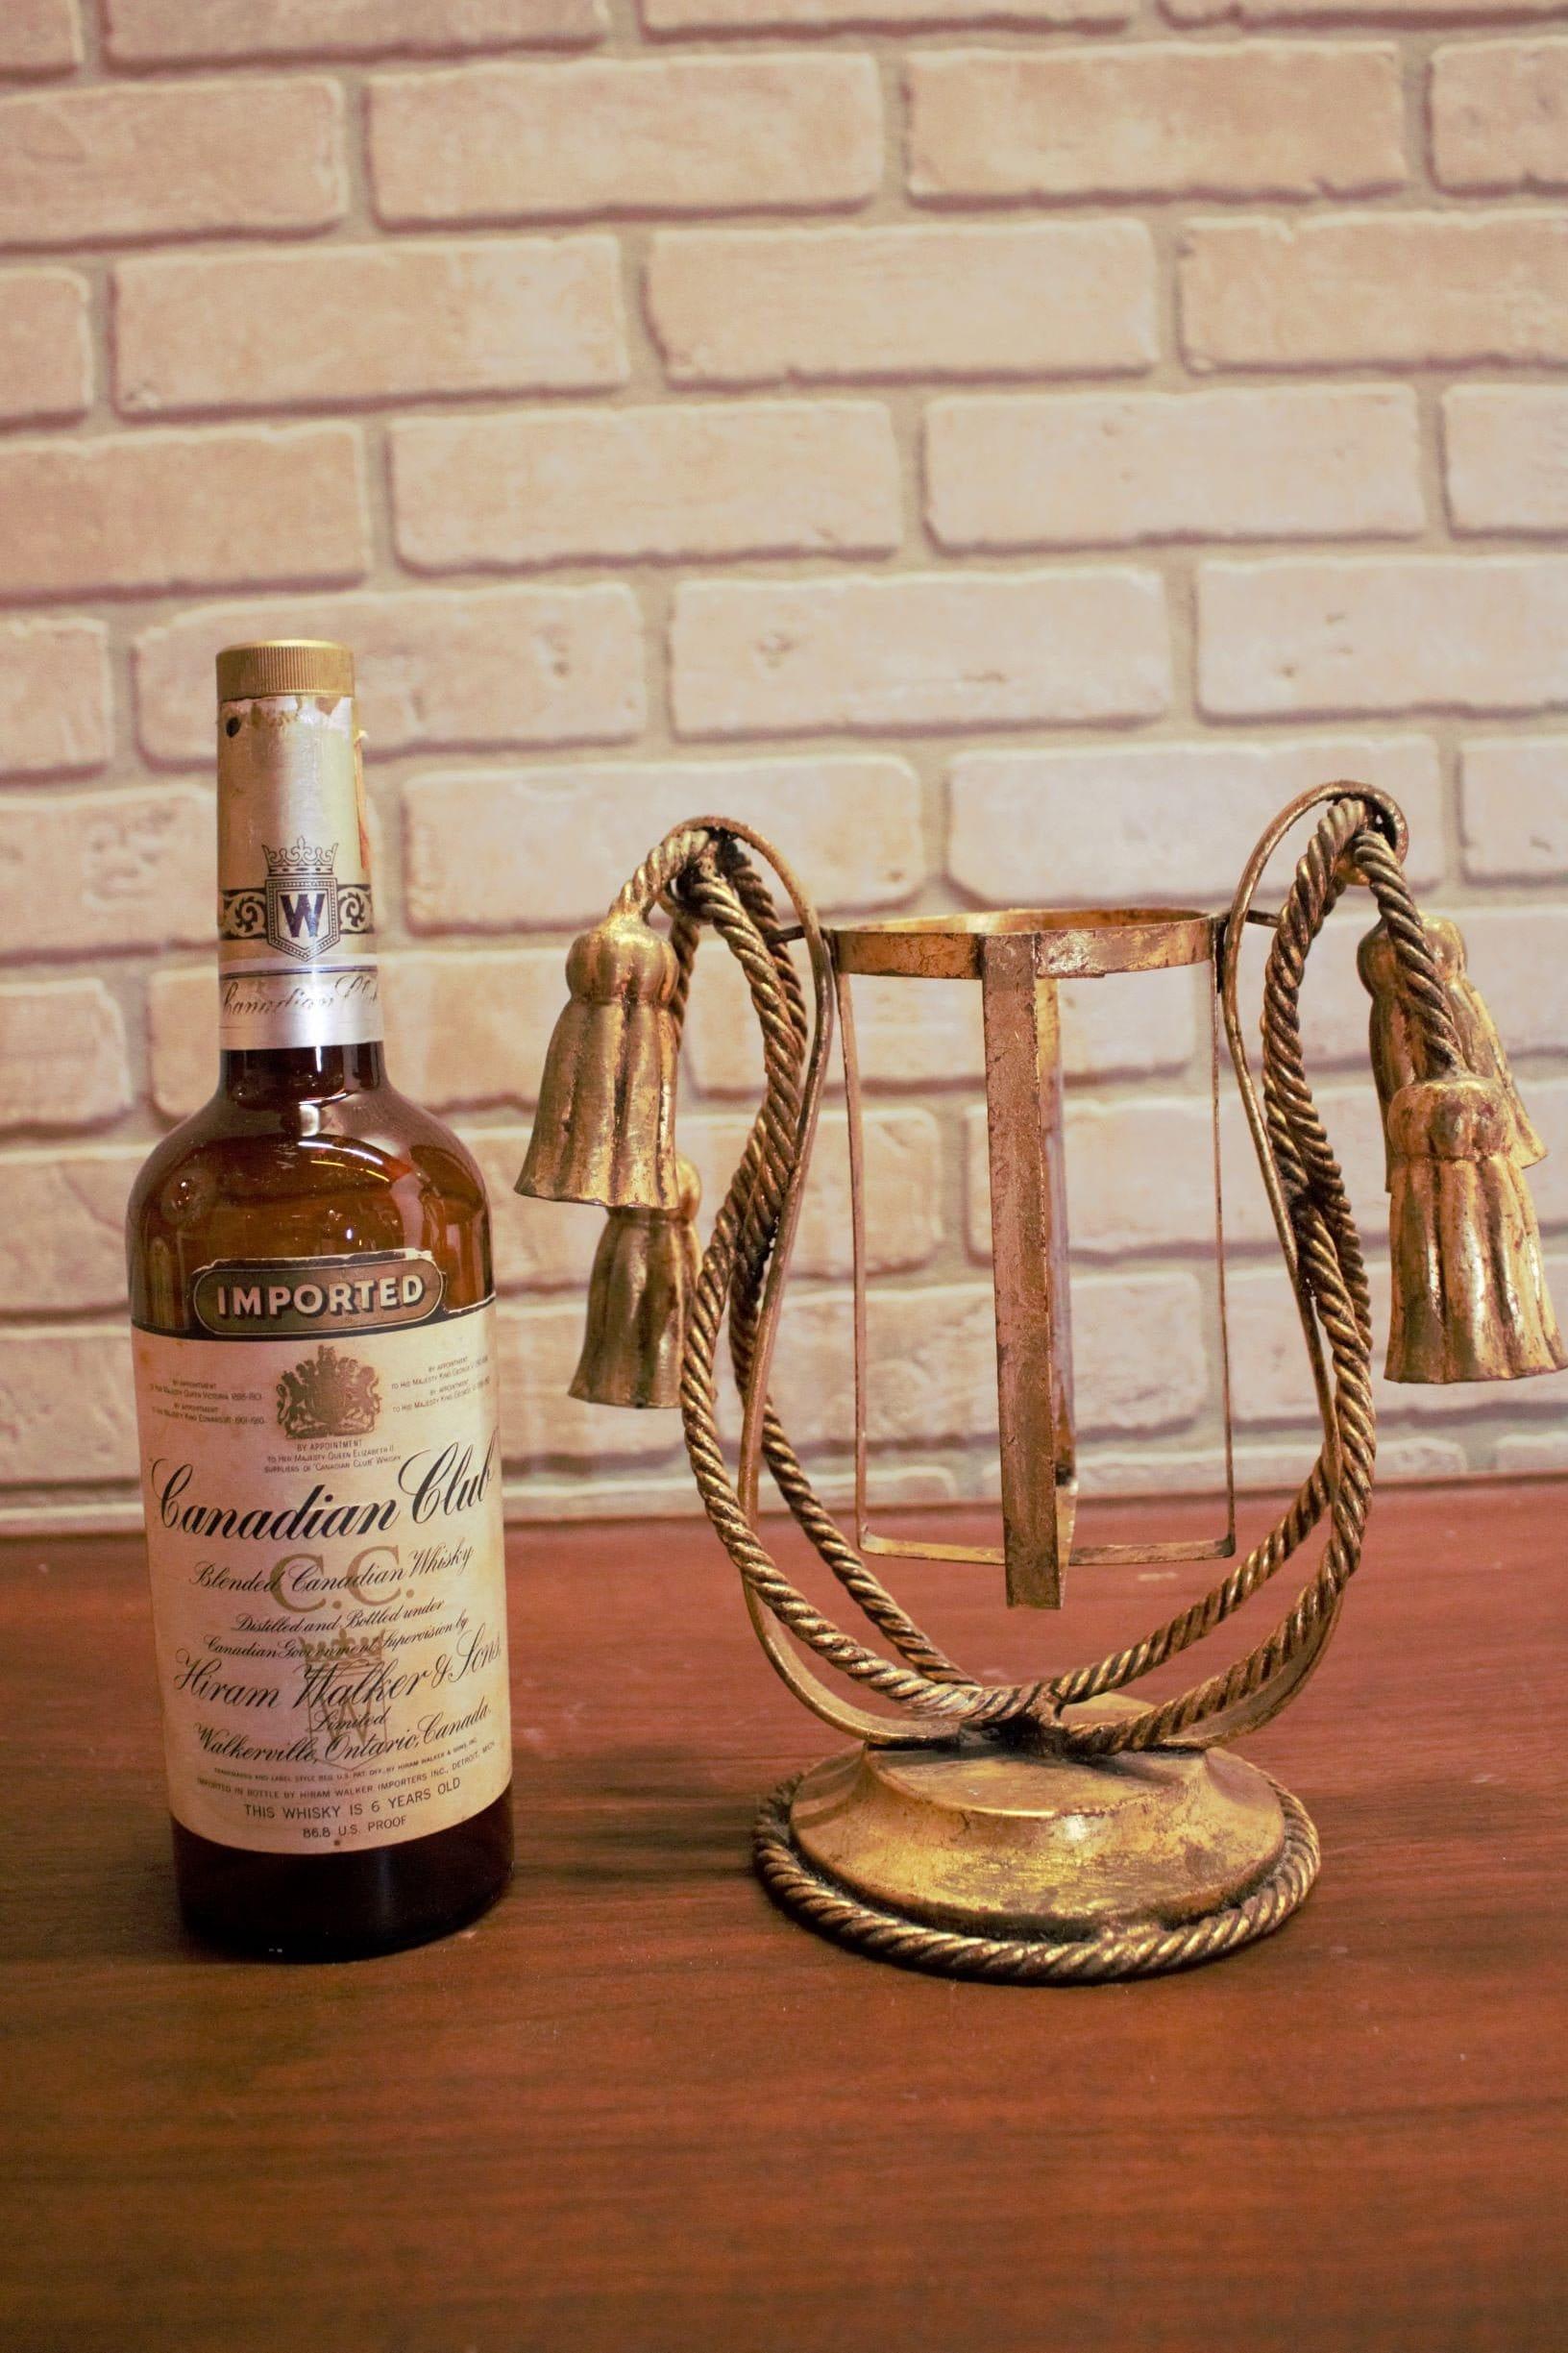 Mid Century Modern Rope and Tassel Bottle Holder

Featuring a vintage rope and tassel and gilt metal swirls with a 20th century design. Display your treasured wines with style while you entertain. Perfect for an in-home bar. 

Bottle not included.